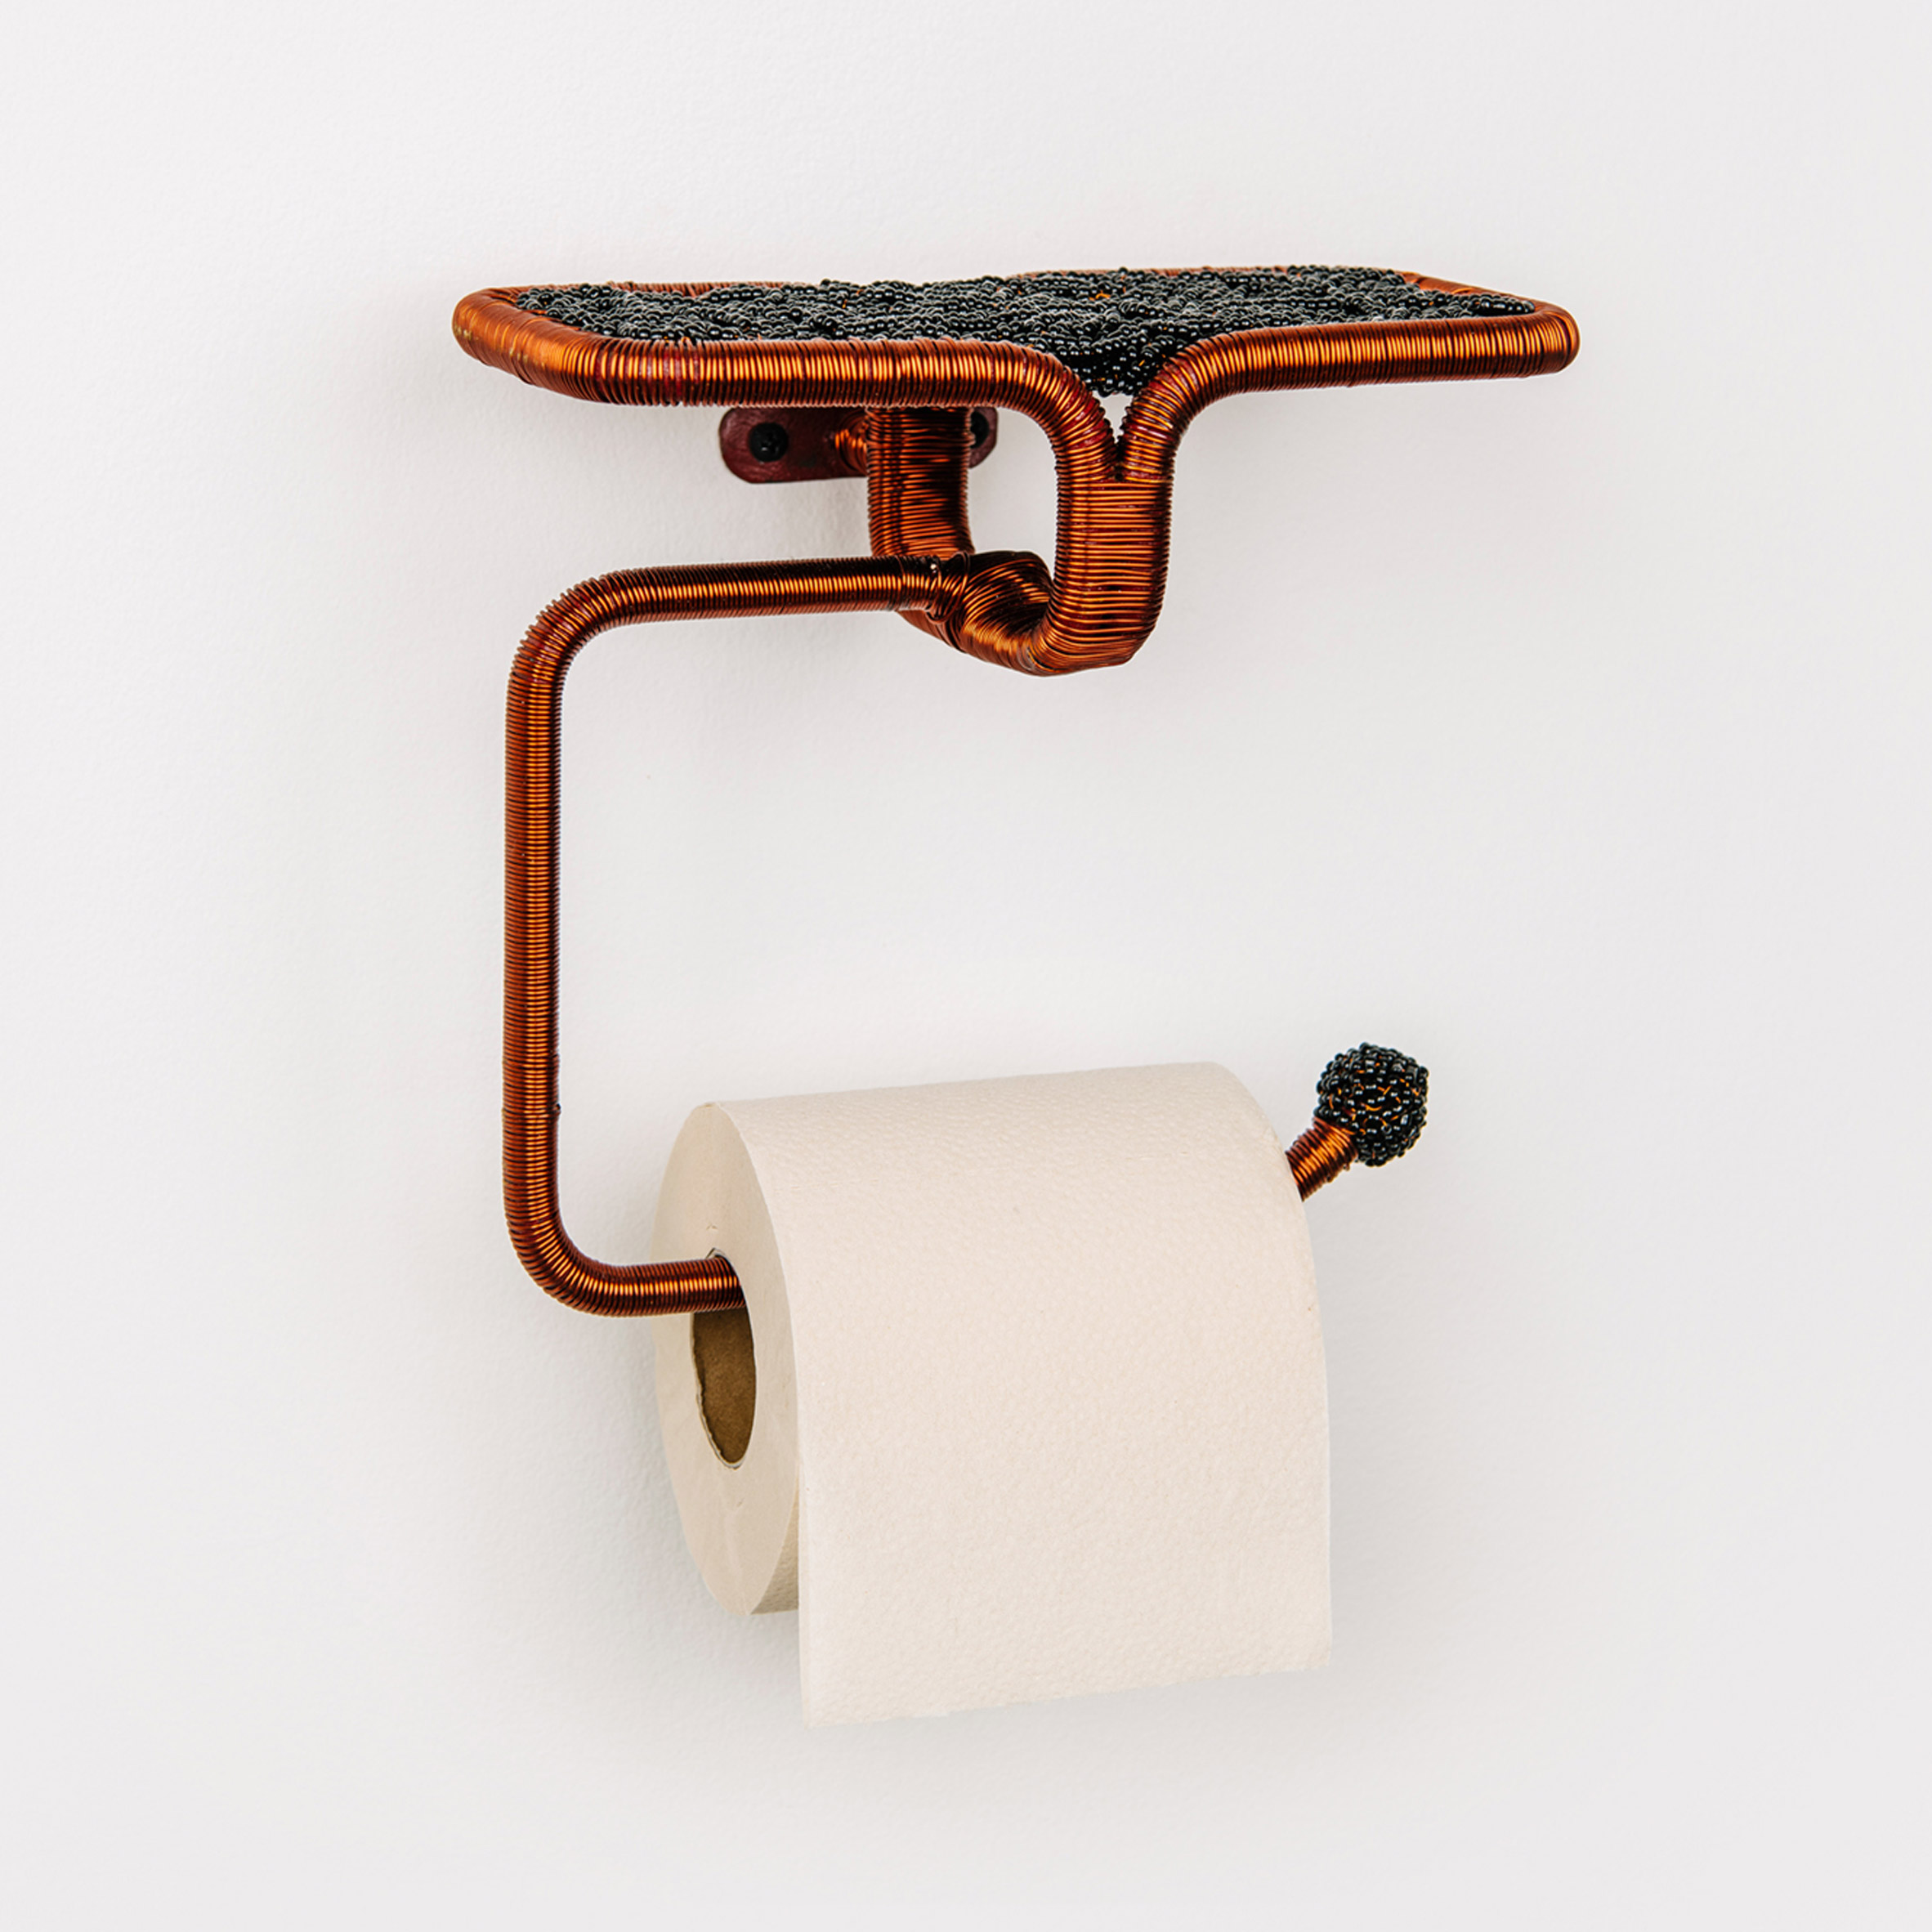 10 designs that reimagine the humble toilet roll holder